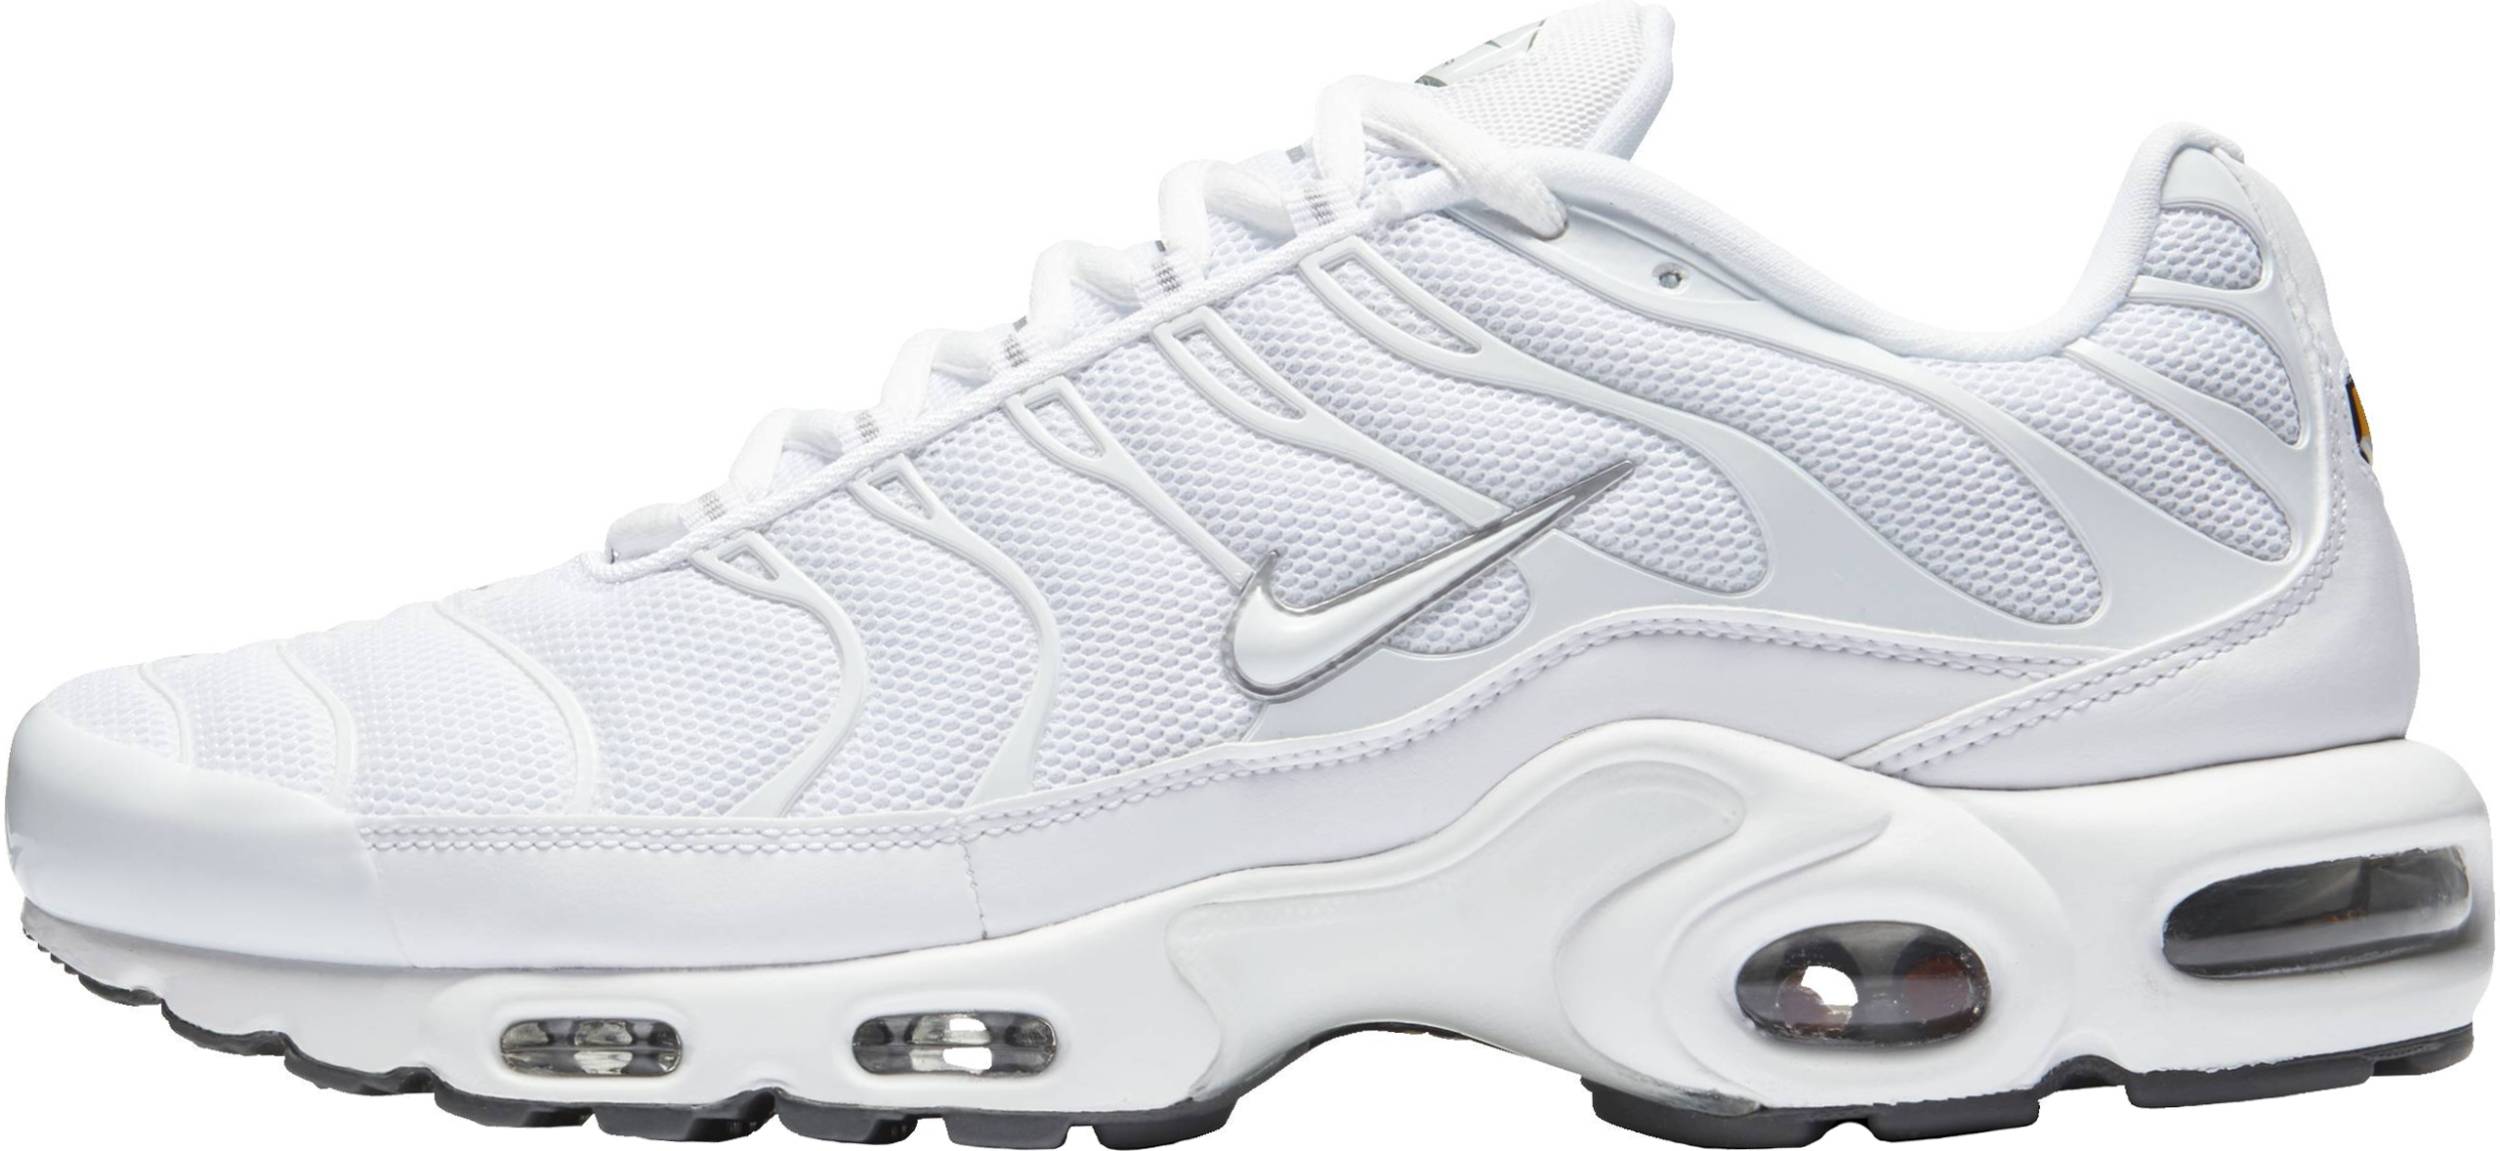 Only $119 + Review of Nike Air Max Plus 